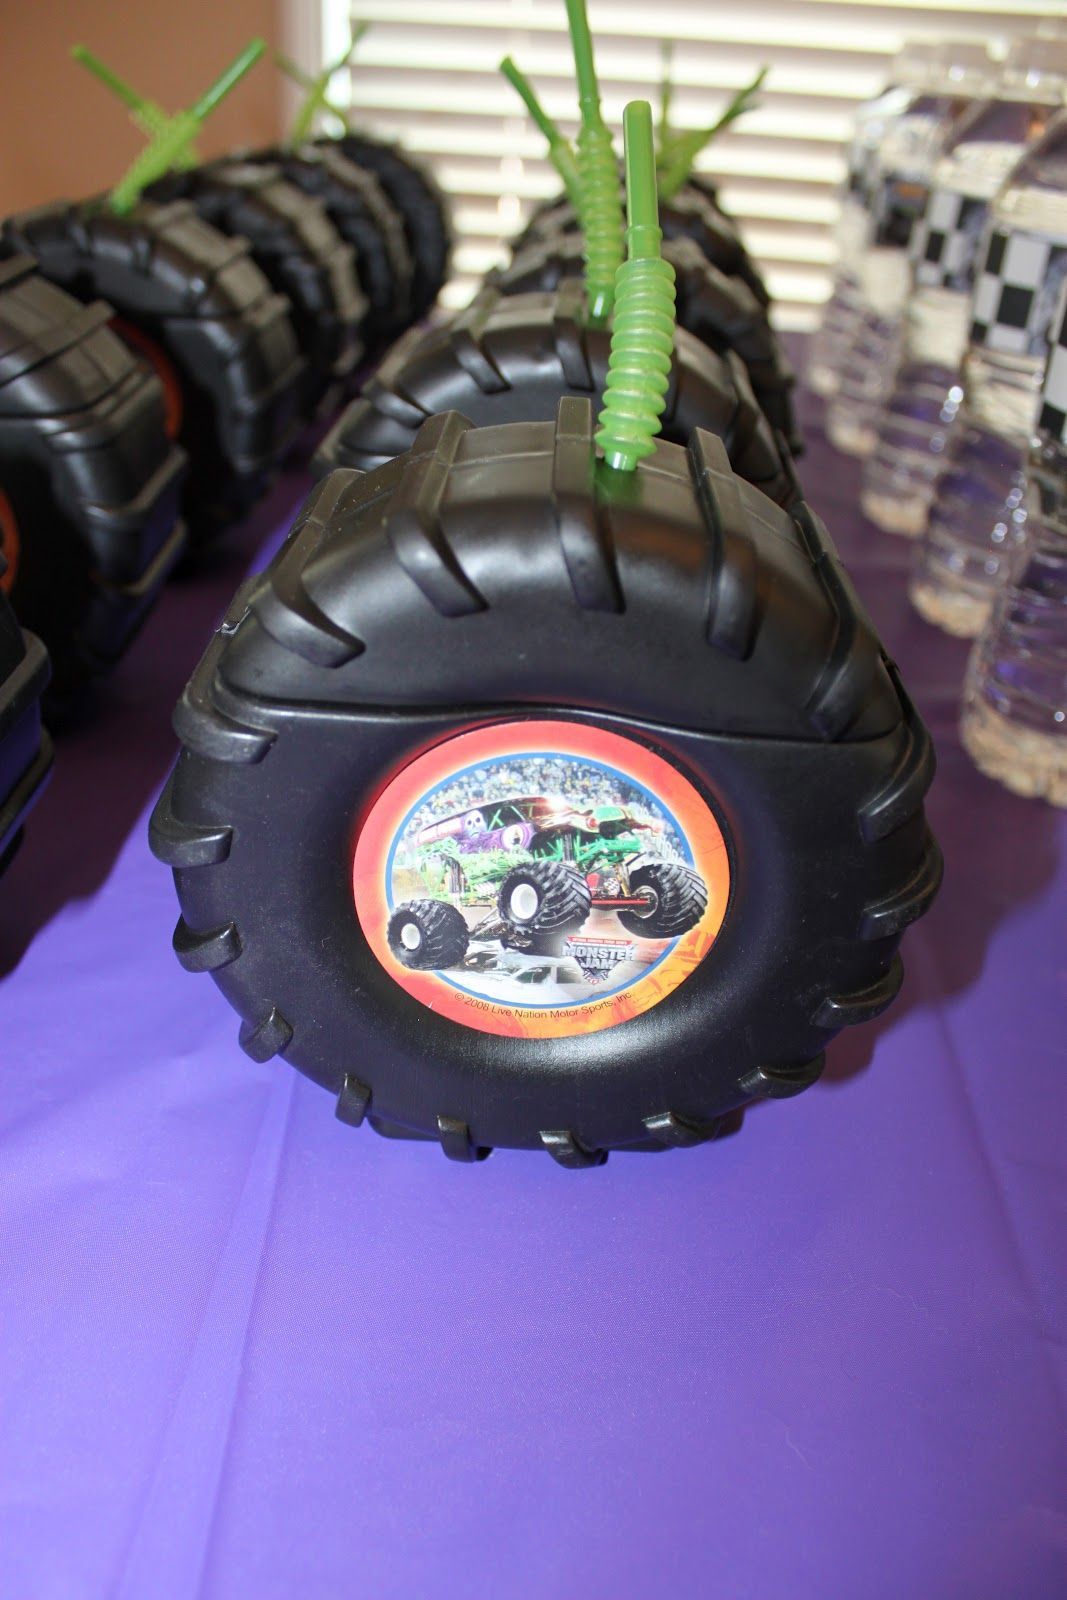 It’s Fun 4 Me!: Monster Truck 5th Birthday Party